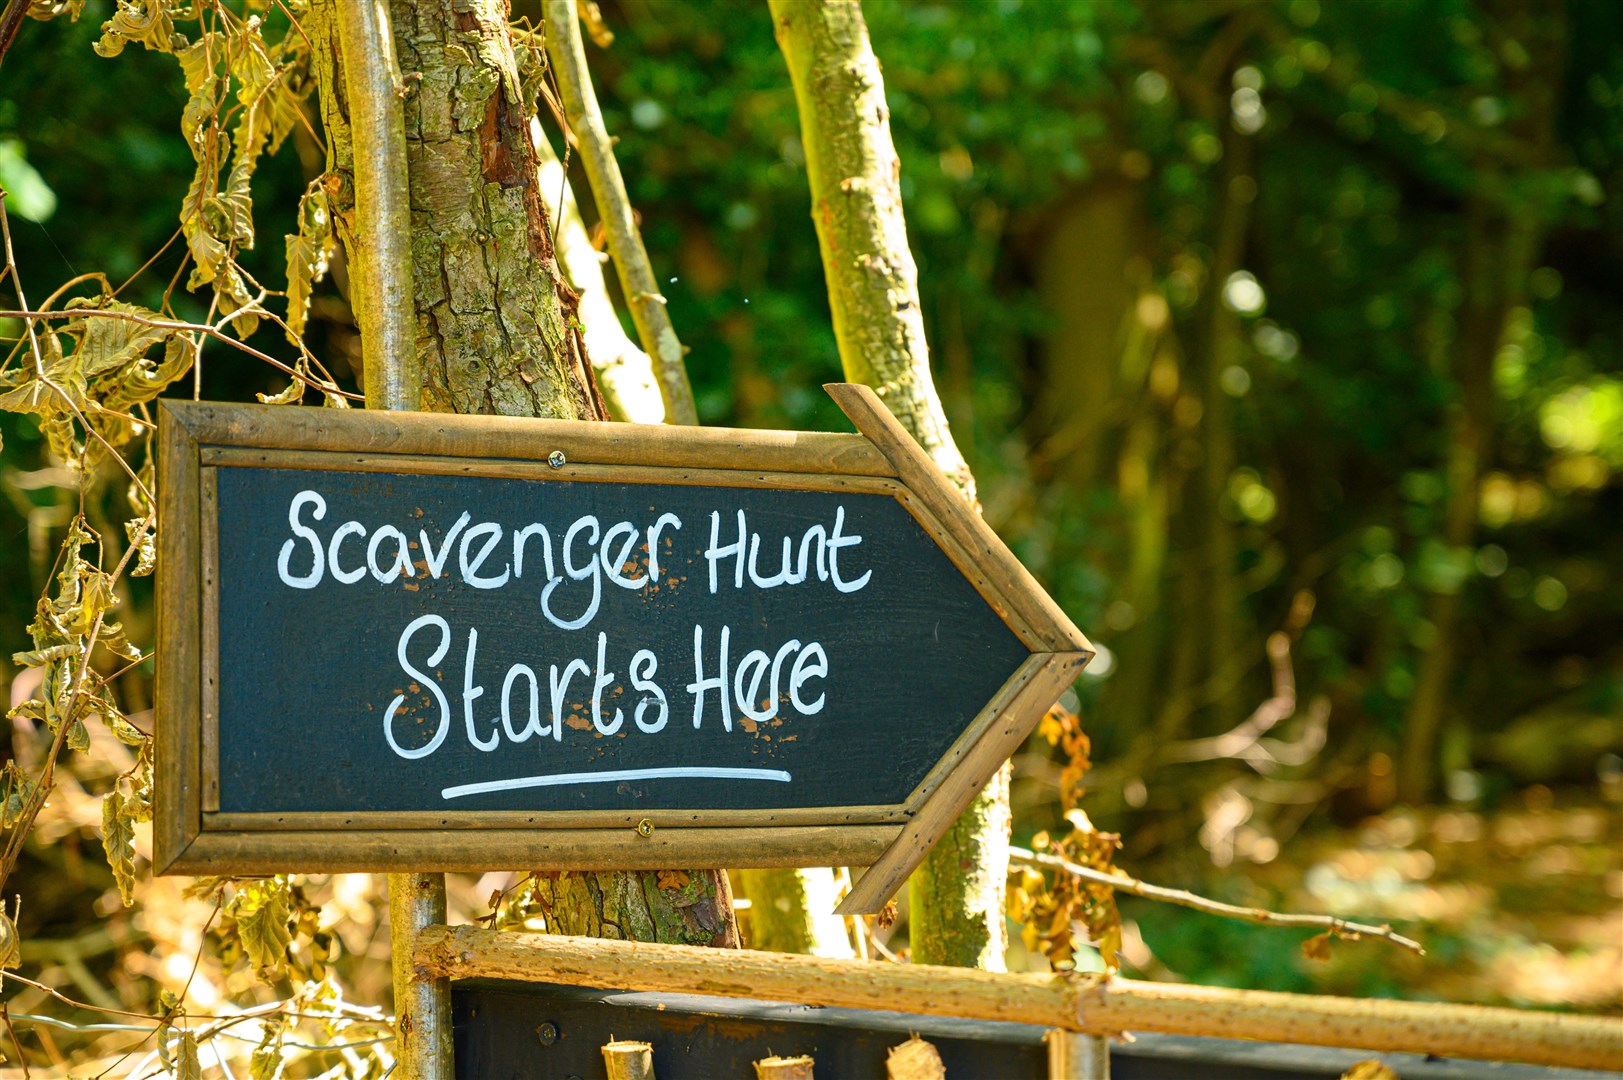 A scavenger hunt is running all weekend as part of the Kyle of Sutherland Gala.